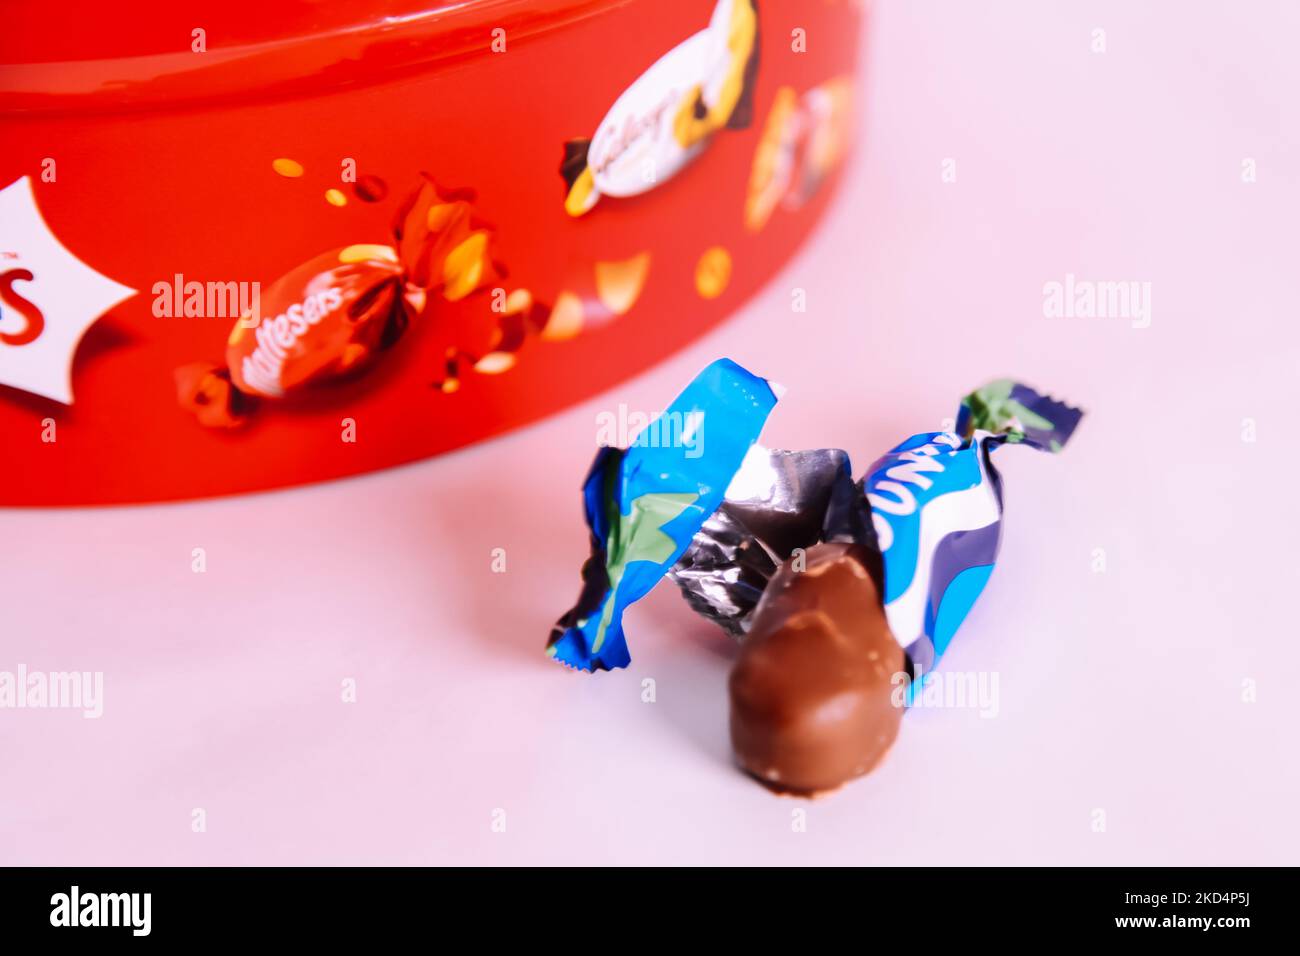 Plastic tub of Celebrations chocolate treat sweets 2022 Christmas edition - Bounty coconut chocolate bar sweet left out Stock Photo